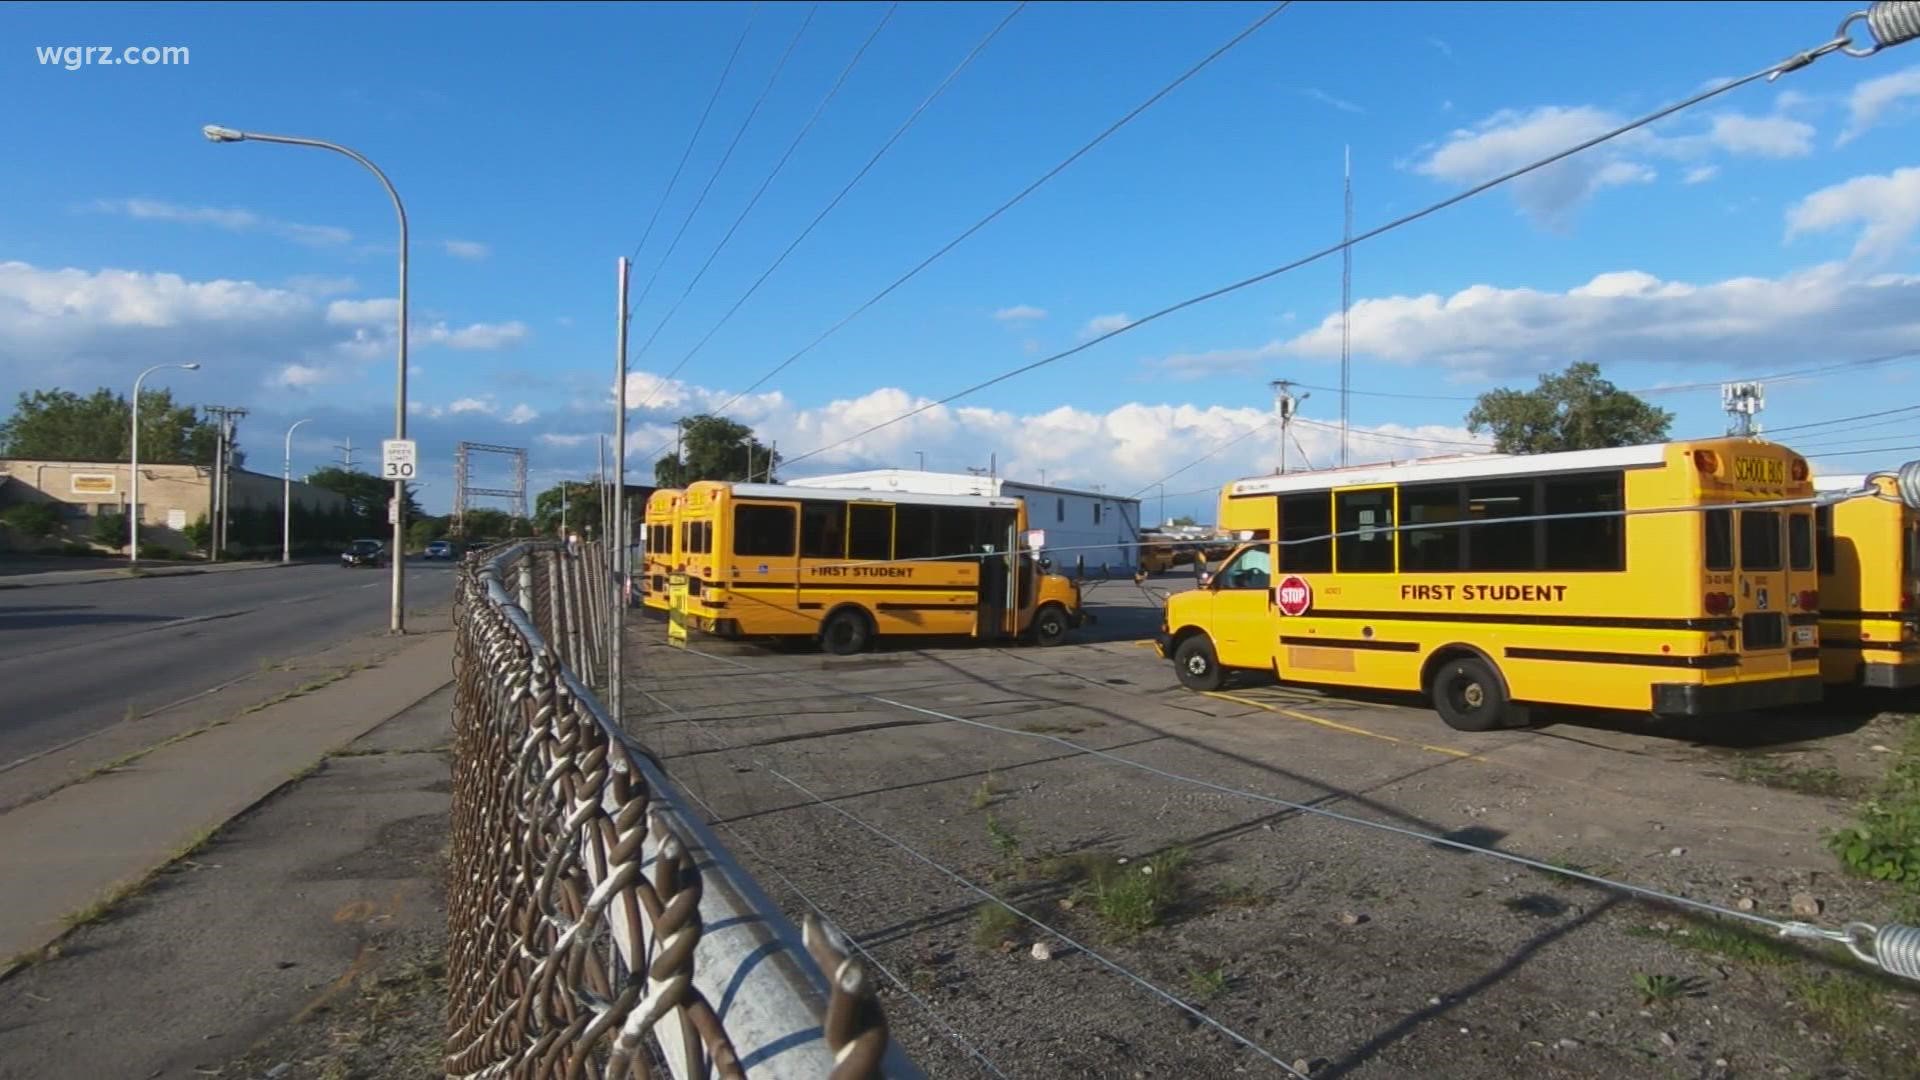 This year is arguably one of the most challenging years districts have had to navigate after a pandemic. Now some are facing a new challenge, a lack of bus drivers.